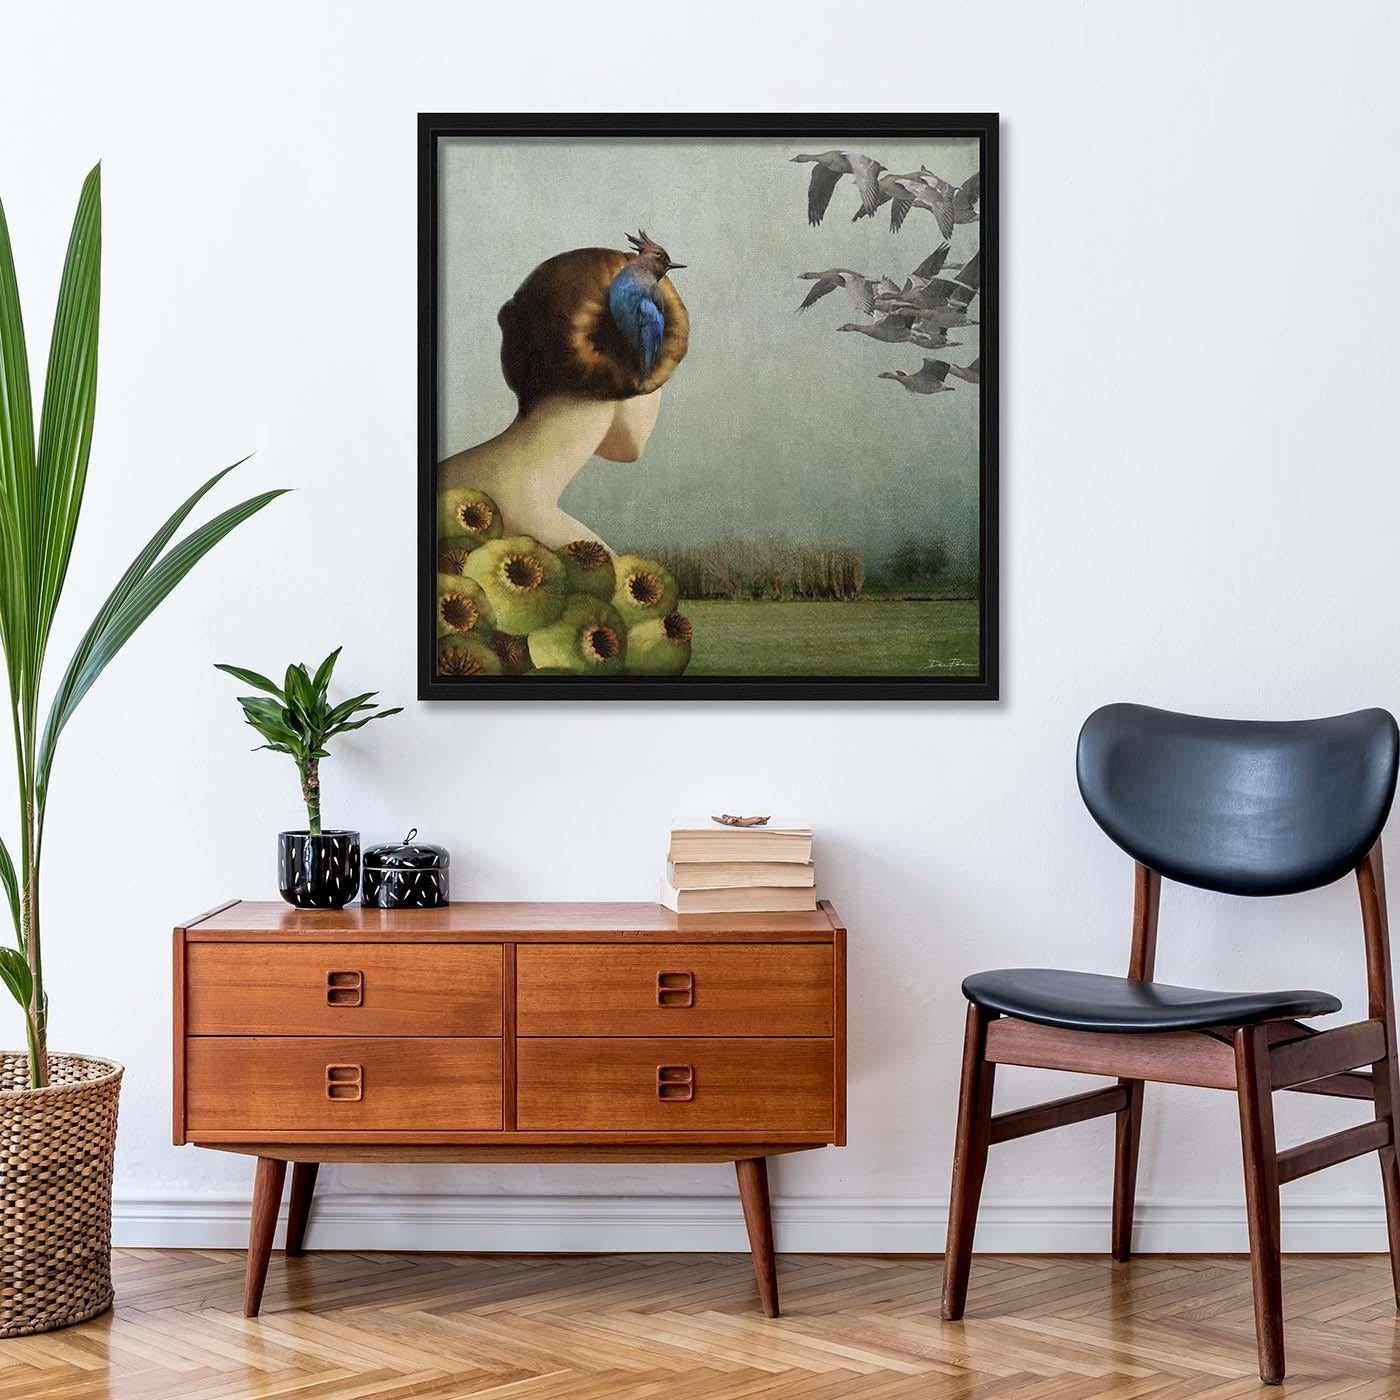 This Pop-Surrealist digital painting depicts a blue woodpecker nestled in a woman's hair, lost in happy thoughts. Viewed from behind, the female figure looks out at the leaden horizons of fate, punctuated by a flock of gray geese, the messengers of